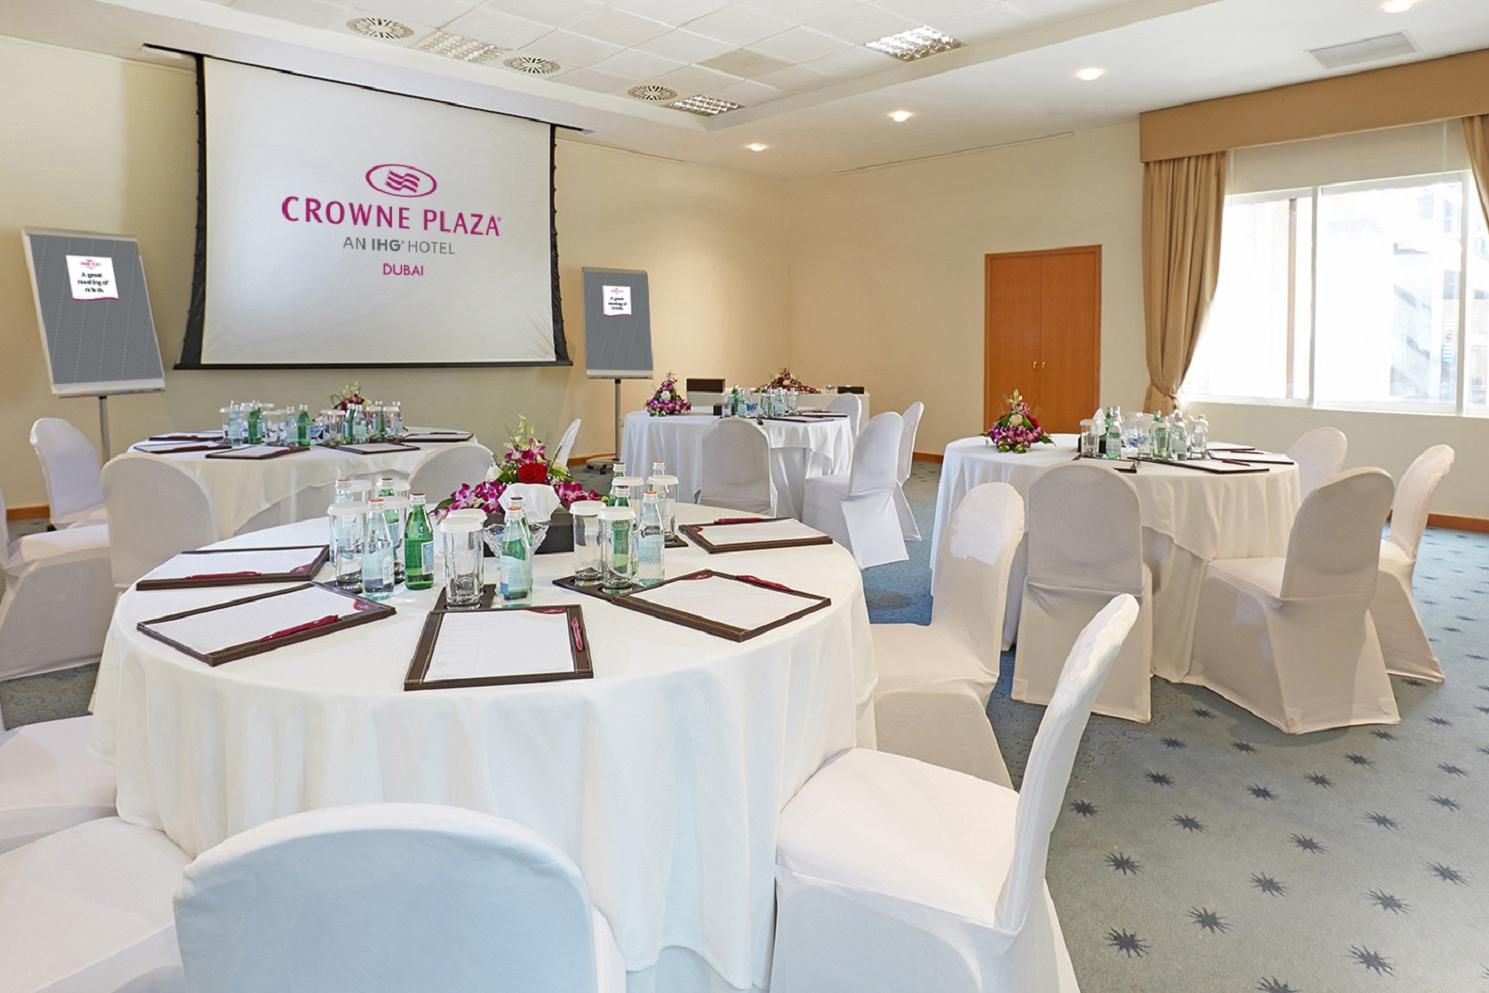 Our 80sqm-large Al Dhiyafah 3 meeting room offers natural daylight